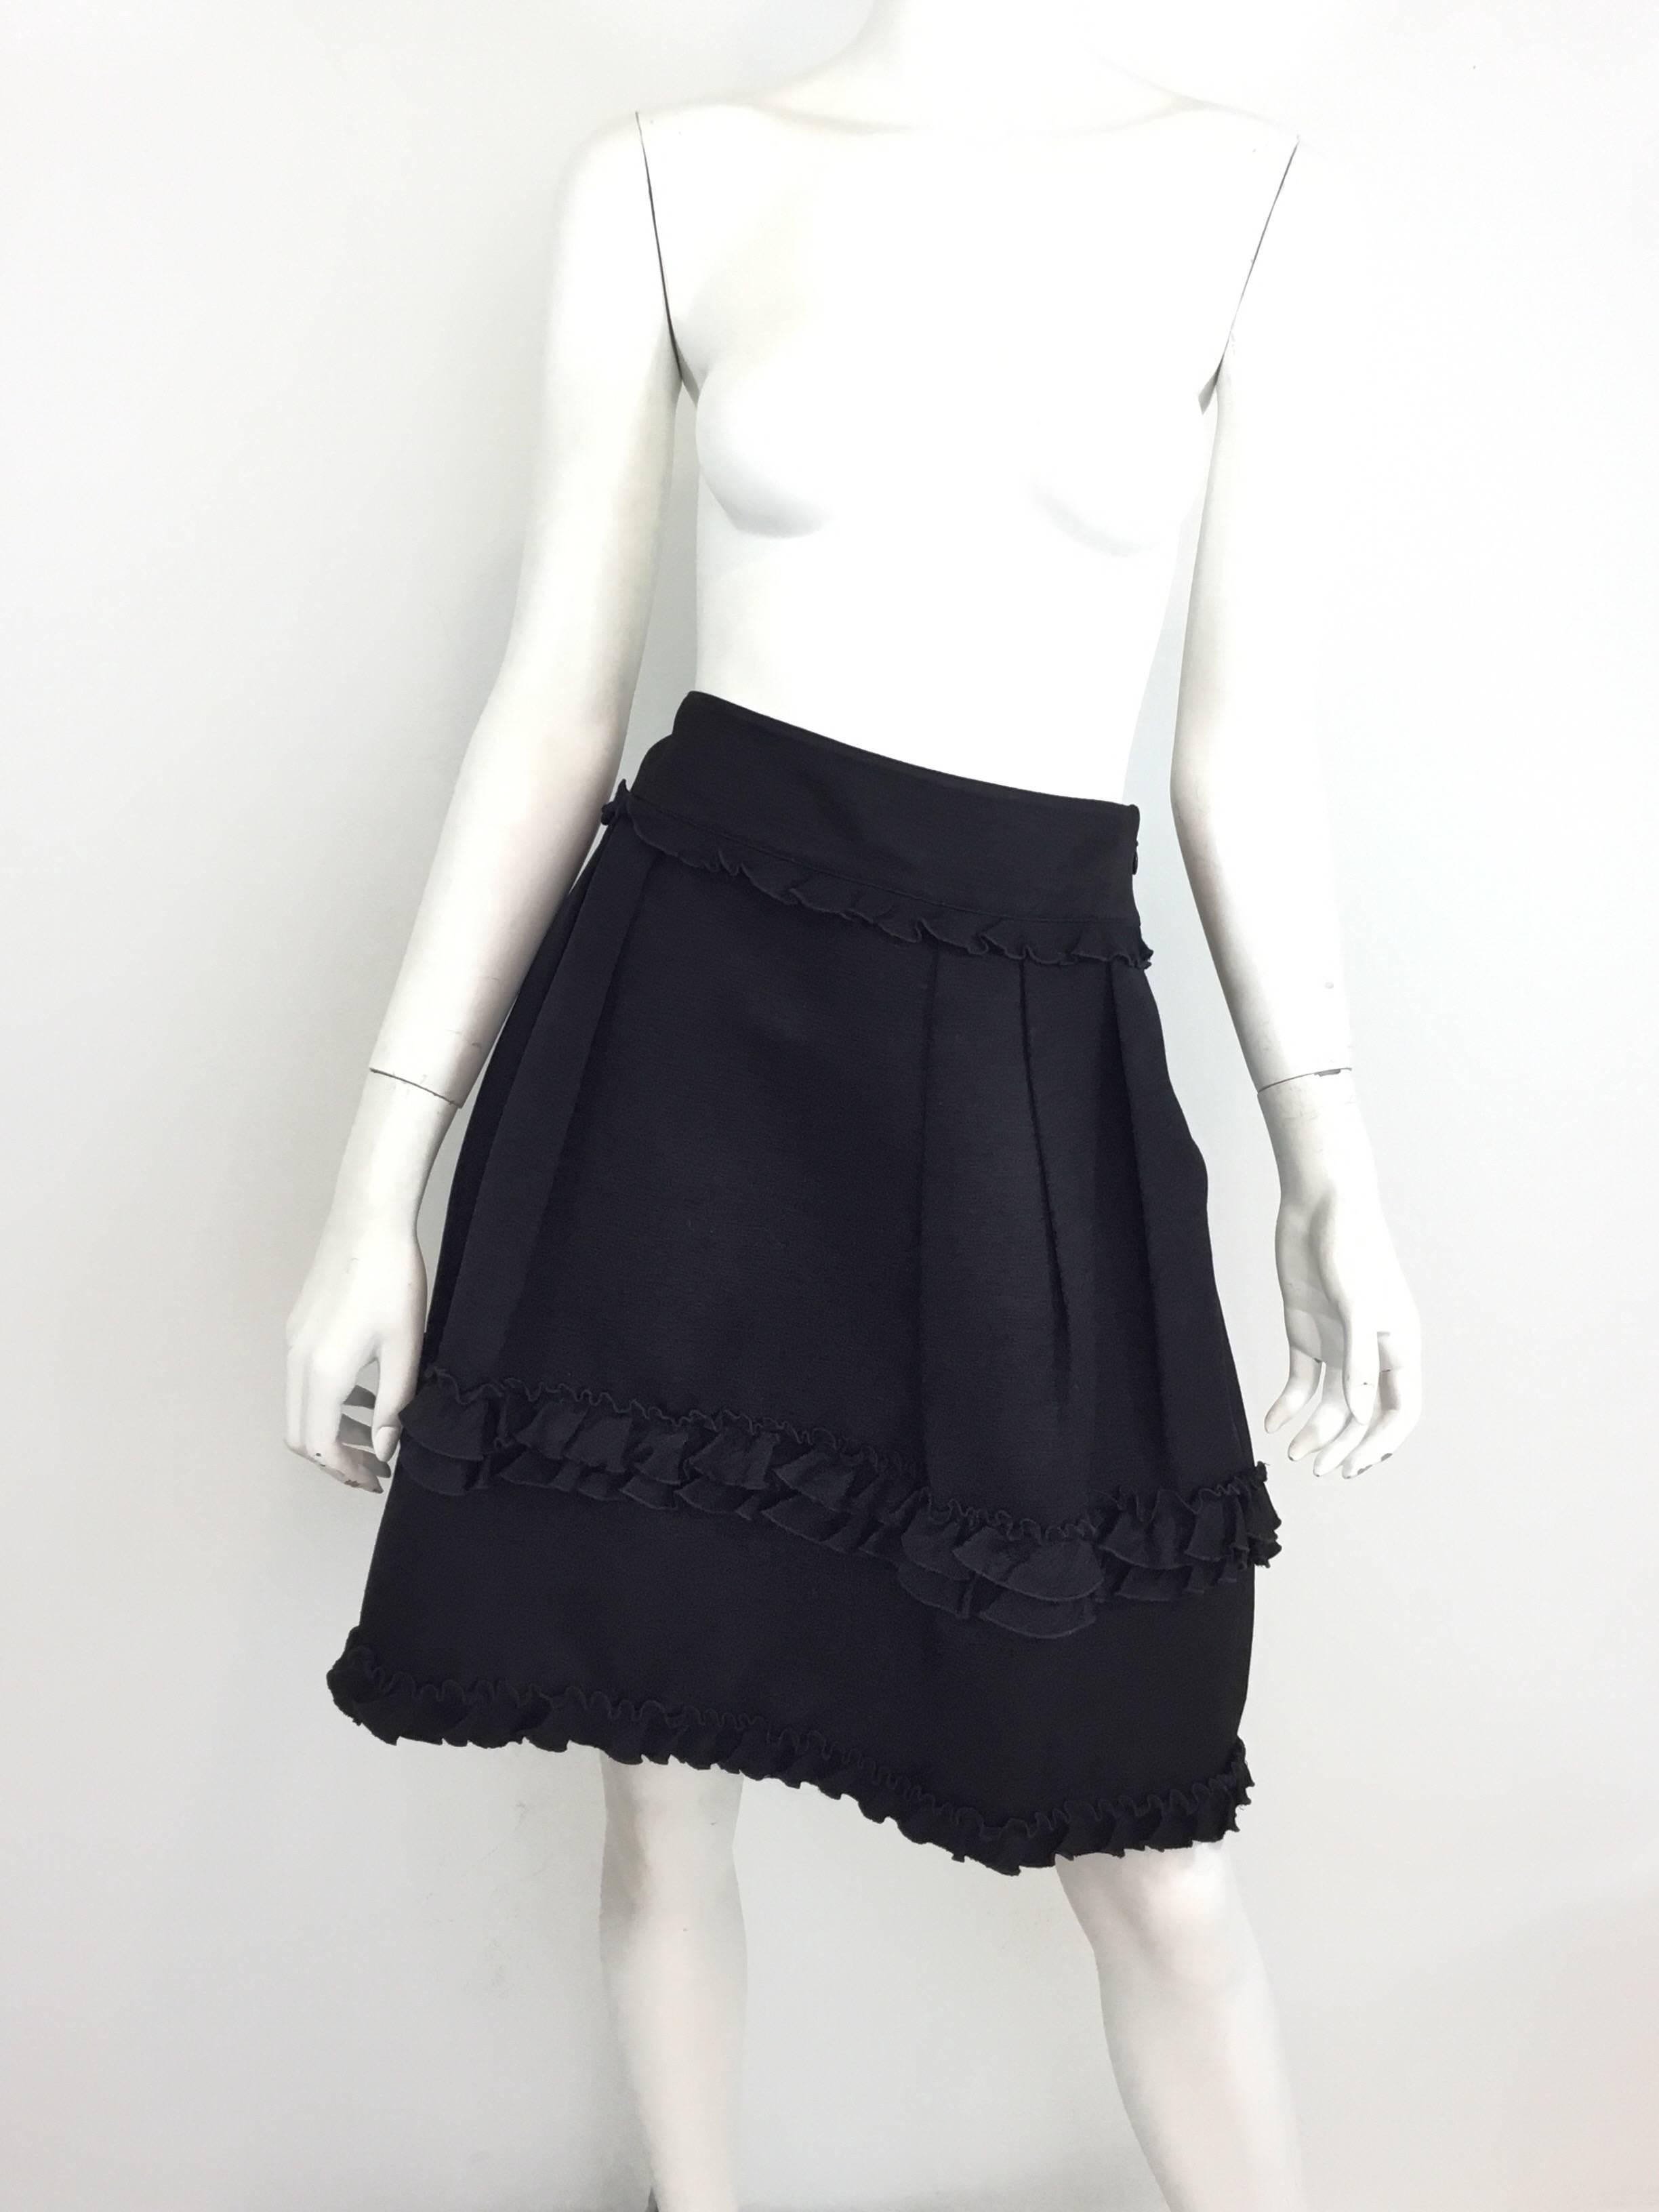 Valentino skirt and jacket set featured in black silk blend fabric. Jacket has a single hook-and-eye fastening, faux slip pockets at the bust, and a ruffle-like trim. Skirt has a tiered ruffle hem and a side zipper fastening. Labeled size 8, made in